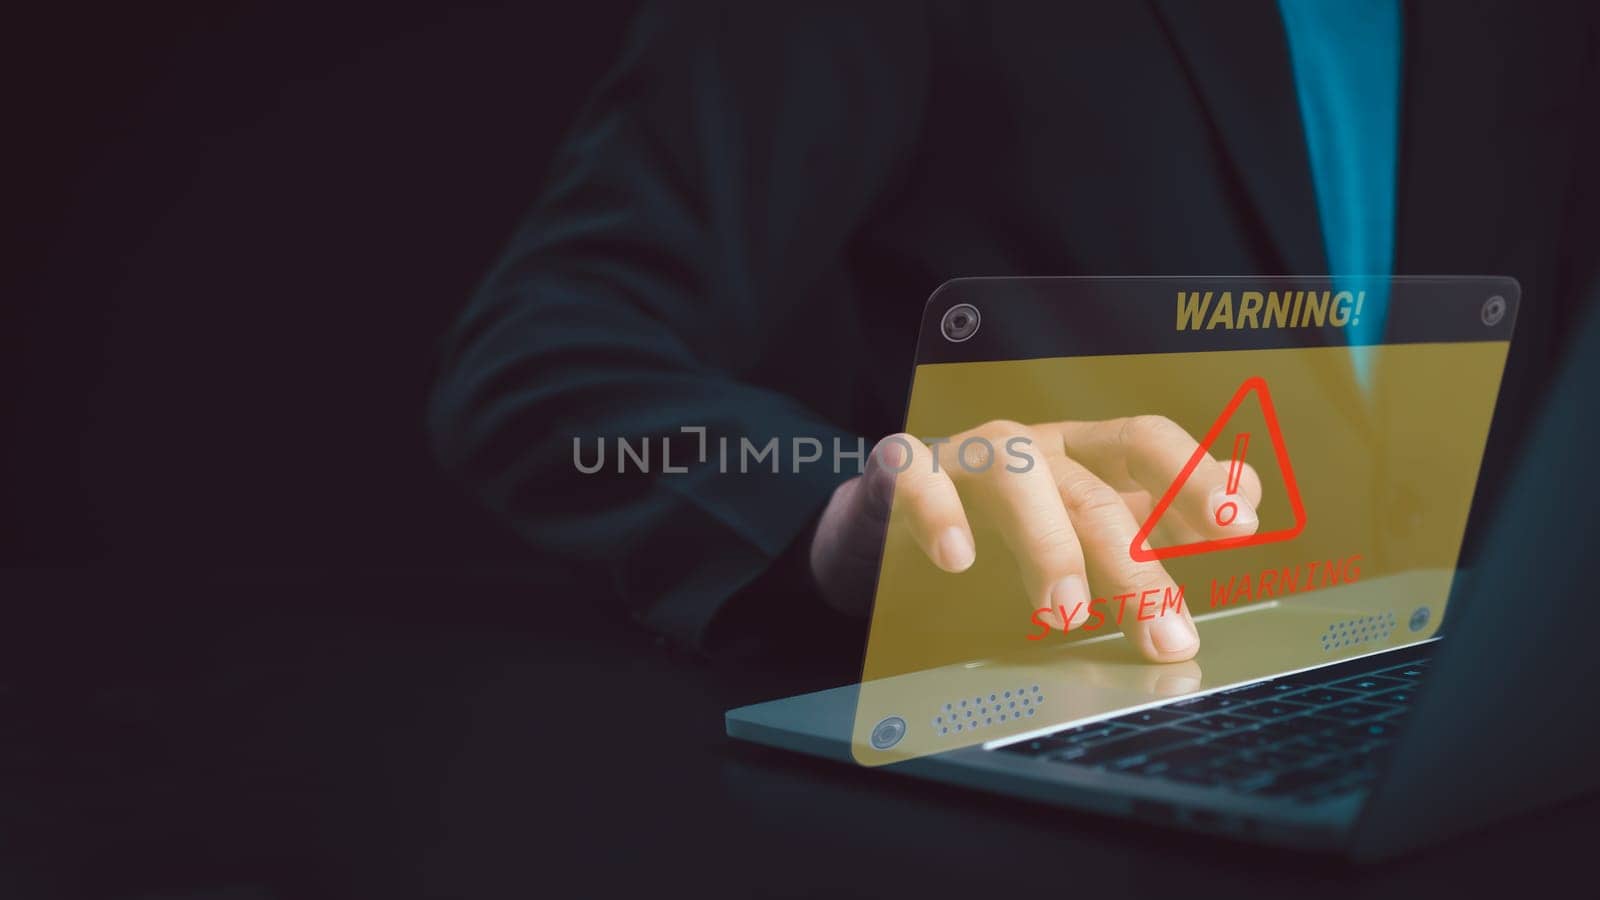 Cyber security and cybercrime, System hacked warning alert on Laptop, Cyber attack on computer network, Virus, Spyware, Malware or Malicious software, Compromised information internet. by Unimages2527